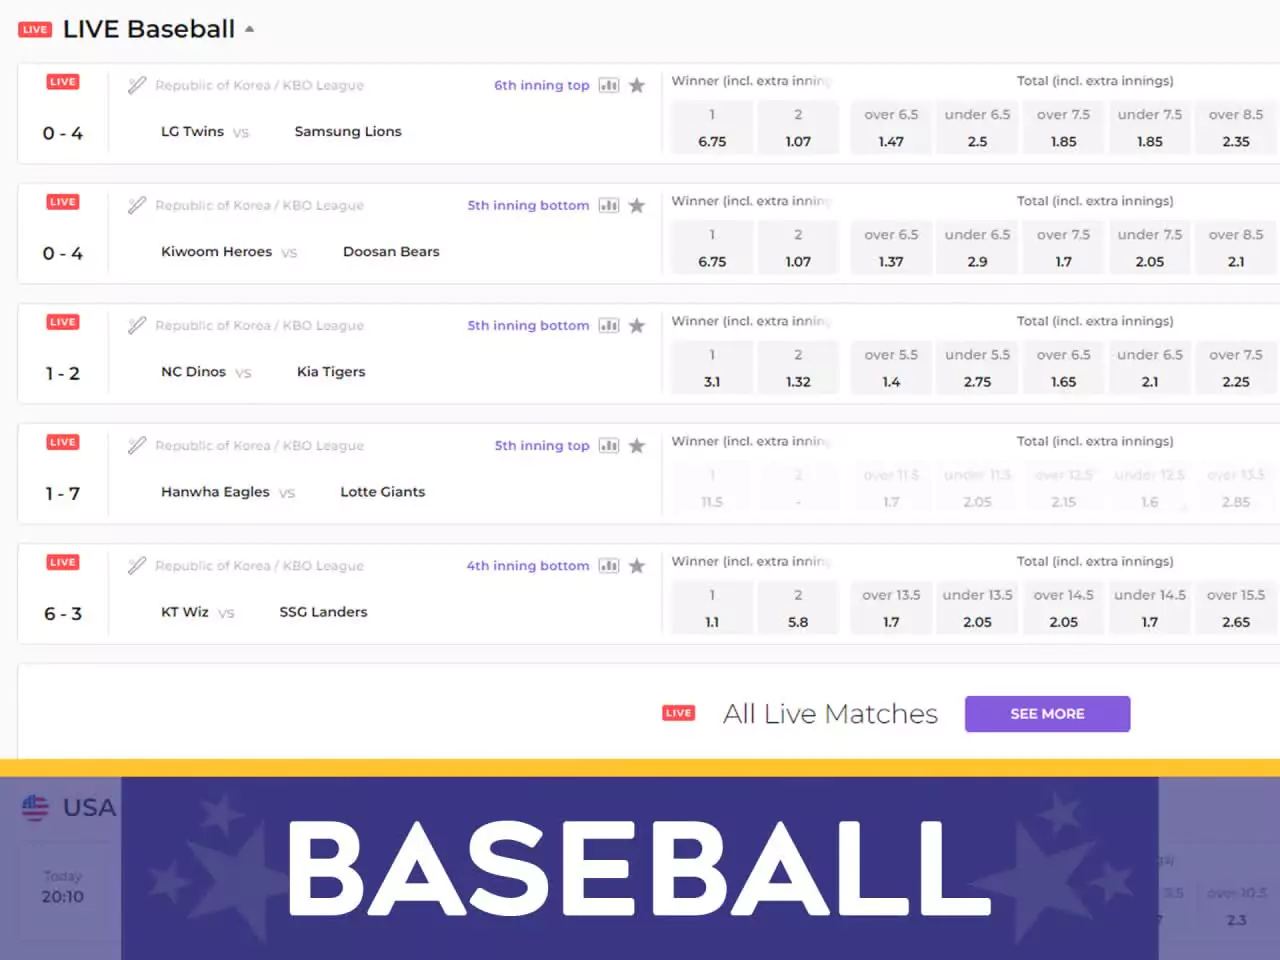 Baseball is also available for betting at Bilbet.